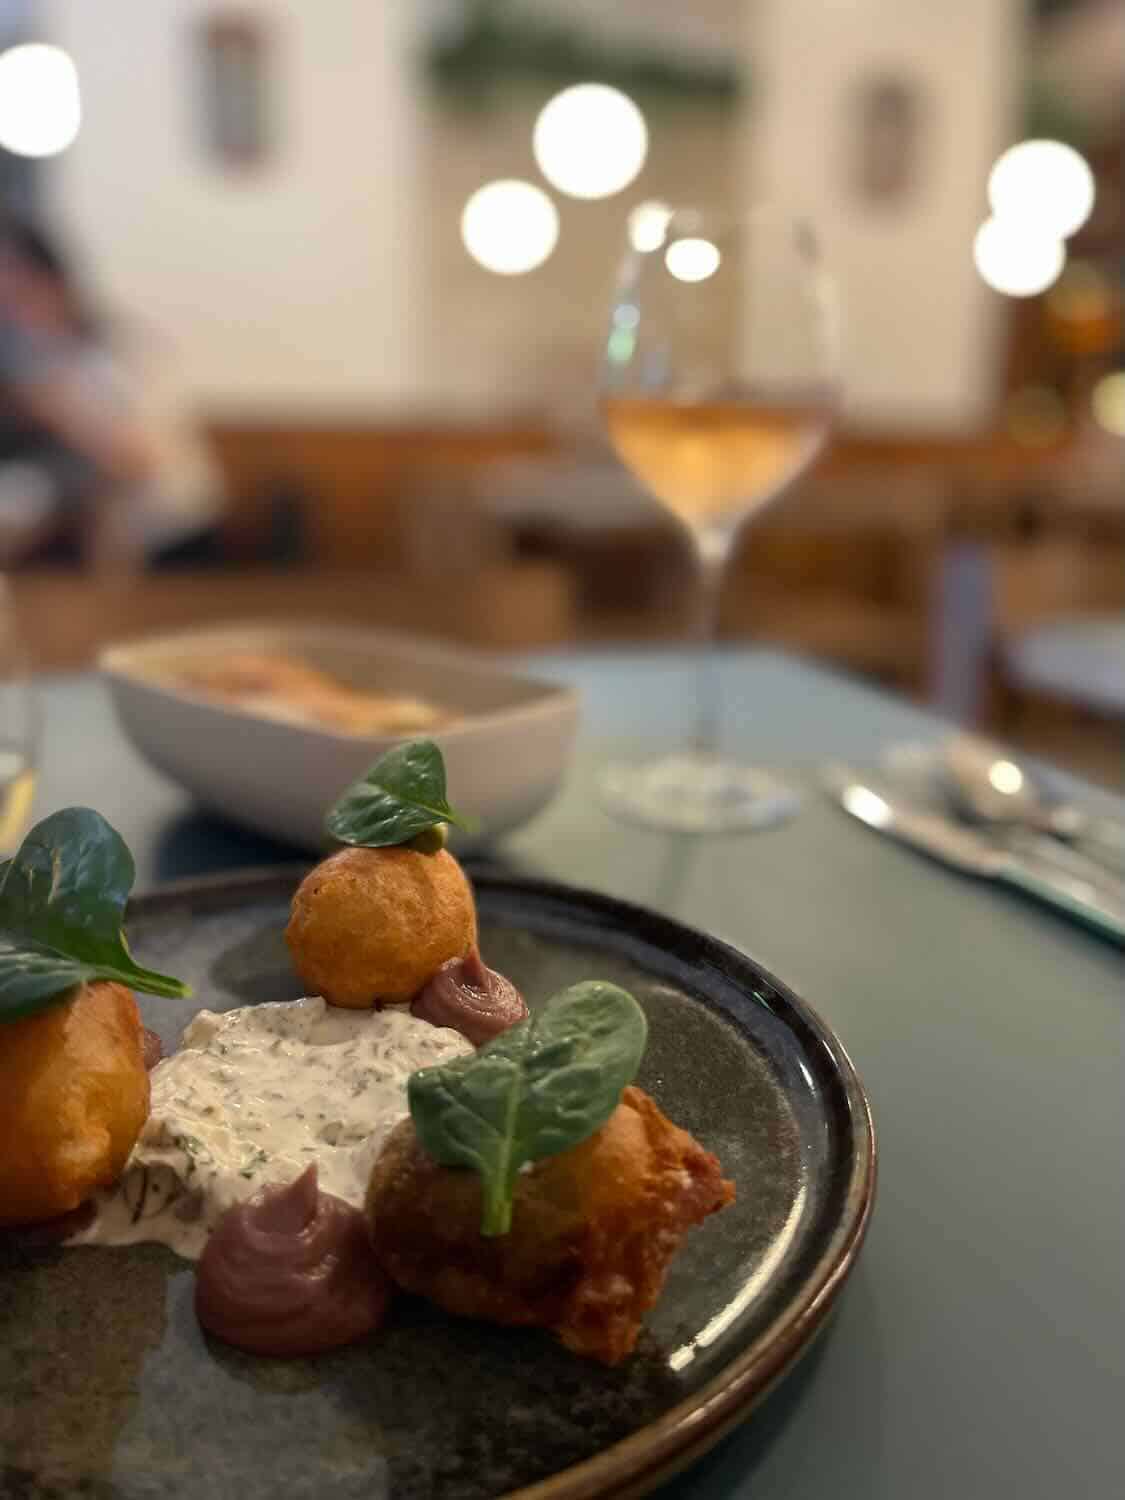 A close-up of a beautifully plated dish at Hebe restaurant in Paris, featuring three golden-brown fritters garnished with fresh greens, a creamy sauce, and a glass of rosé wine in the background.